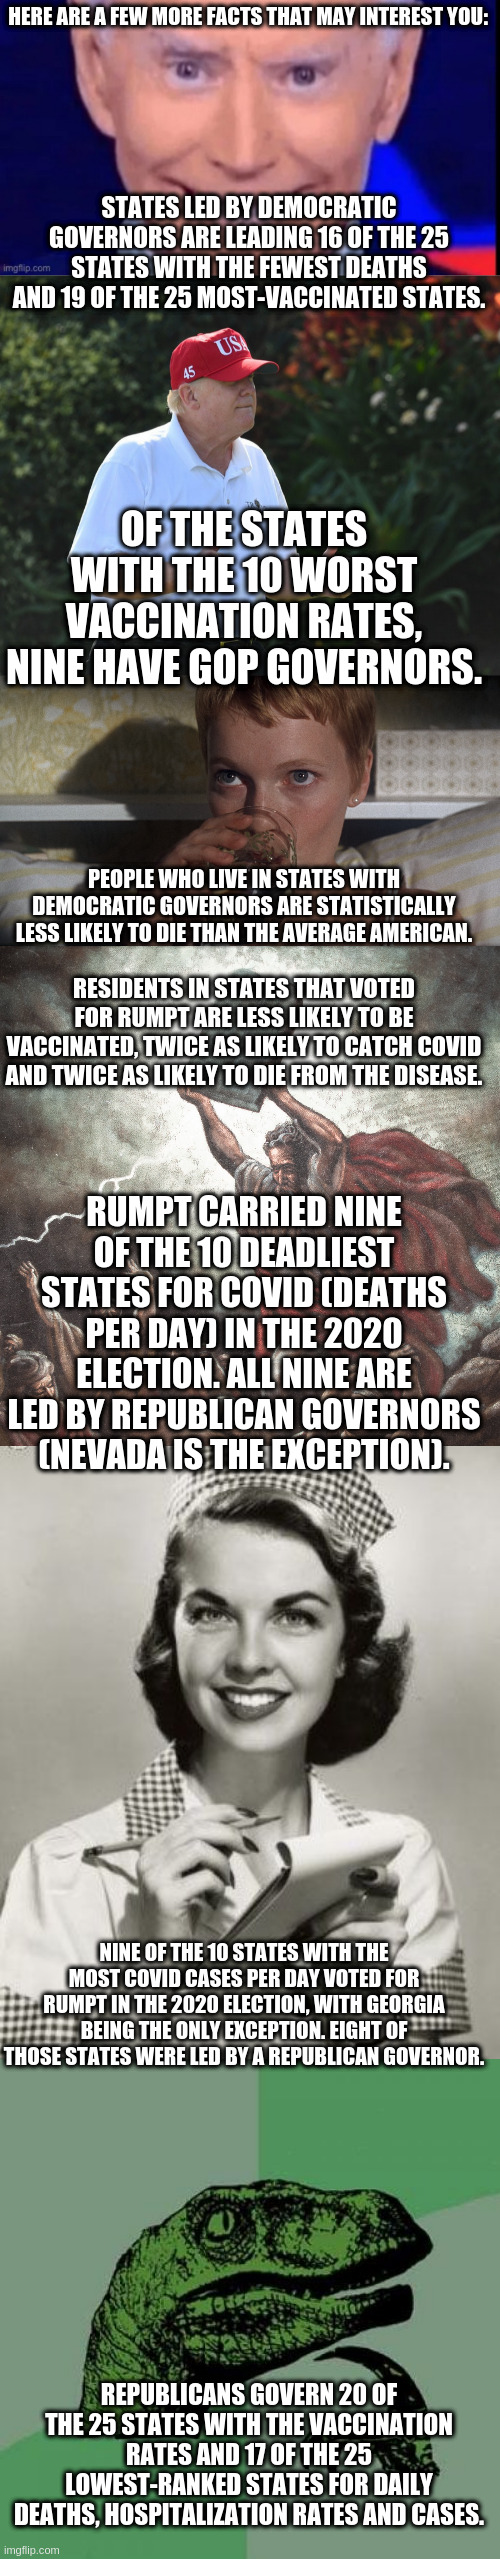 Something to think about over the weekend | HERE ARE A FEW MORE FACTS THAT MAY INTEREST YOU:; STATES LED BY DEMOCRATIC GOVERNORS ARE LEADING 16 OF THE 25 STATES WITH THE FEWEST DEATHS AND 19 OF THE 25 MOST-VACCINATED STATES. OF THE STATES WITH THE 10 WORST VACCINATION RATES, NINE HAVE GOP GOVERNORS. PEOPLE WHO LIVE IN STATES WITH DEMOCRATIC GOVERNORS ARE STATISTICALLY LESS LIKELY TO DIE THAN THE AVERAGE AMERICAN. RESIDENTS IN STATES THAT VOTED FOR RUMPT ARE LESS LIKELY TO BE VACCINATED, TWICE AS LIKELY TO CATCH COVID AND TWICE AS LIKELY TO DIE FROM THE DISEASE. RUMPT CARRIED NINE OF THE 10 DEADLIEST STATES FOR COVID (DEATHS PER DAY) IN THE 2020 ELECTION. ALL NINE ARE LED BY REPUBLICAN GOVERNORS (NEVADA IS THE EXCEPTION). NINE OF THE 10 STATES WITH THE MOST COVID CASES PER DAY VOTED FOR RUMPT IN THE 2020 ELECTION, WITH GEORGIA BEING THE ONLY EXCEPTION. EIGHT OF THOSE STATES WERE LED BY A REPUBLICAN GOVERNOR. REPUBLICANS GOVERN 20 OF THE 25 STATES WITH THE VACCINATION RATES AND 17 OF THE 25 LOWEST-RANKED STATES FOR DAILY DEATHS, HOSPITALIZATION RATES AND CASES. | image tagged in i said dont squeeze the charmin,bs rumpt,rosemary,moses,can i take your order,memes | made w/ Imgflip meme maker